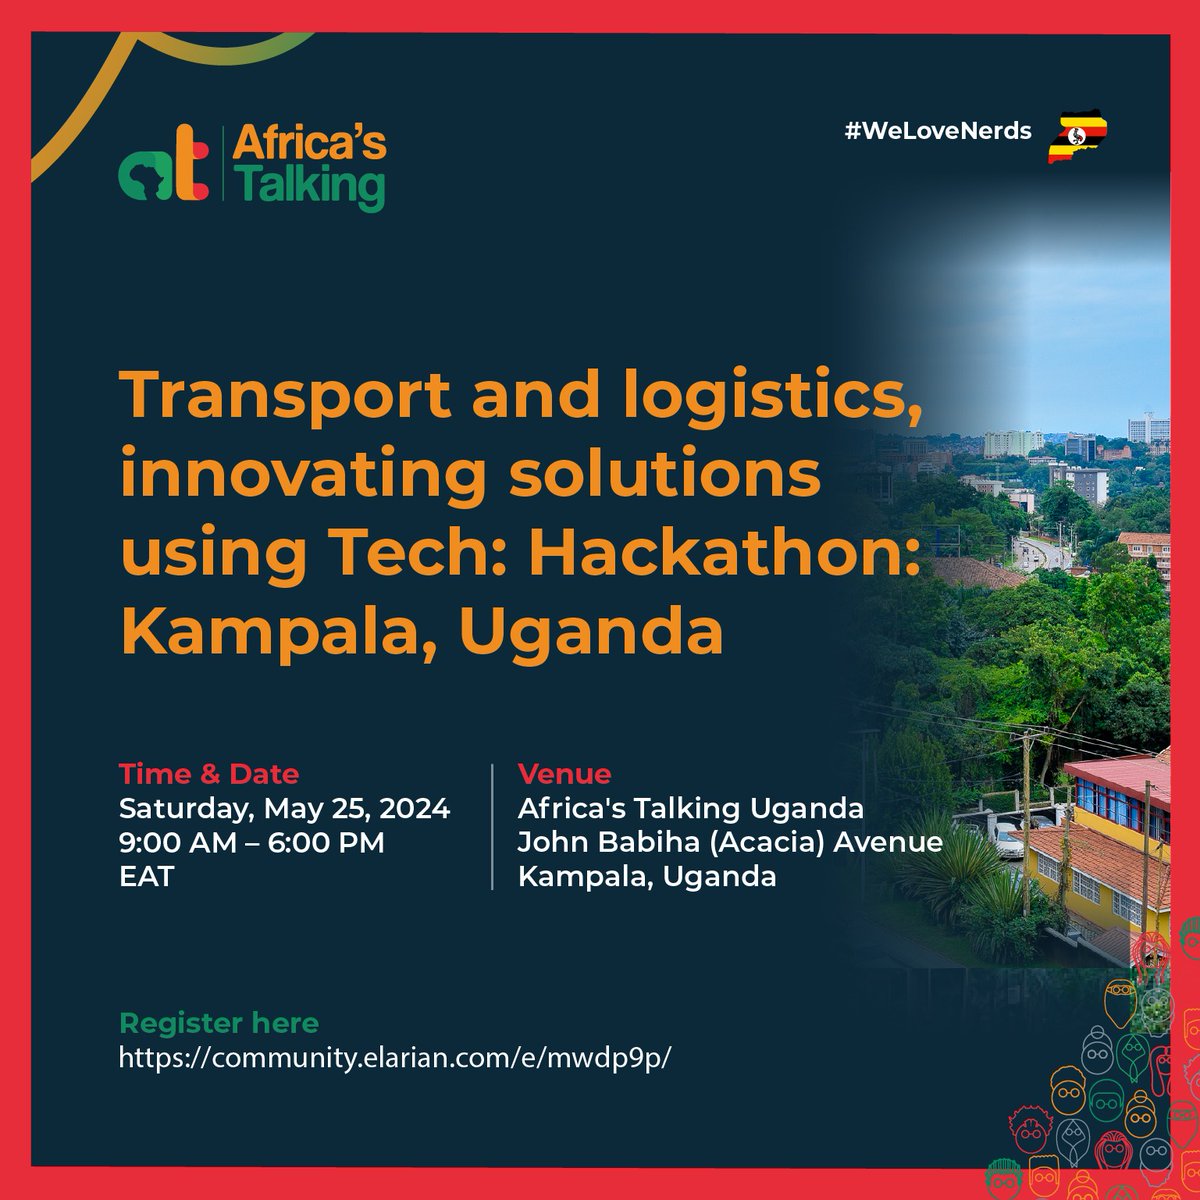 Are you interested in building Tech solutions in transport and logistics industry? Then plan to attend our hackathon happening on 25th, May at our @Africastalking Kla office. Please RSVP here. 

community.elarian.com/events/details…